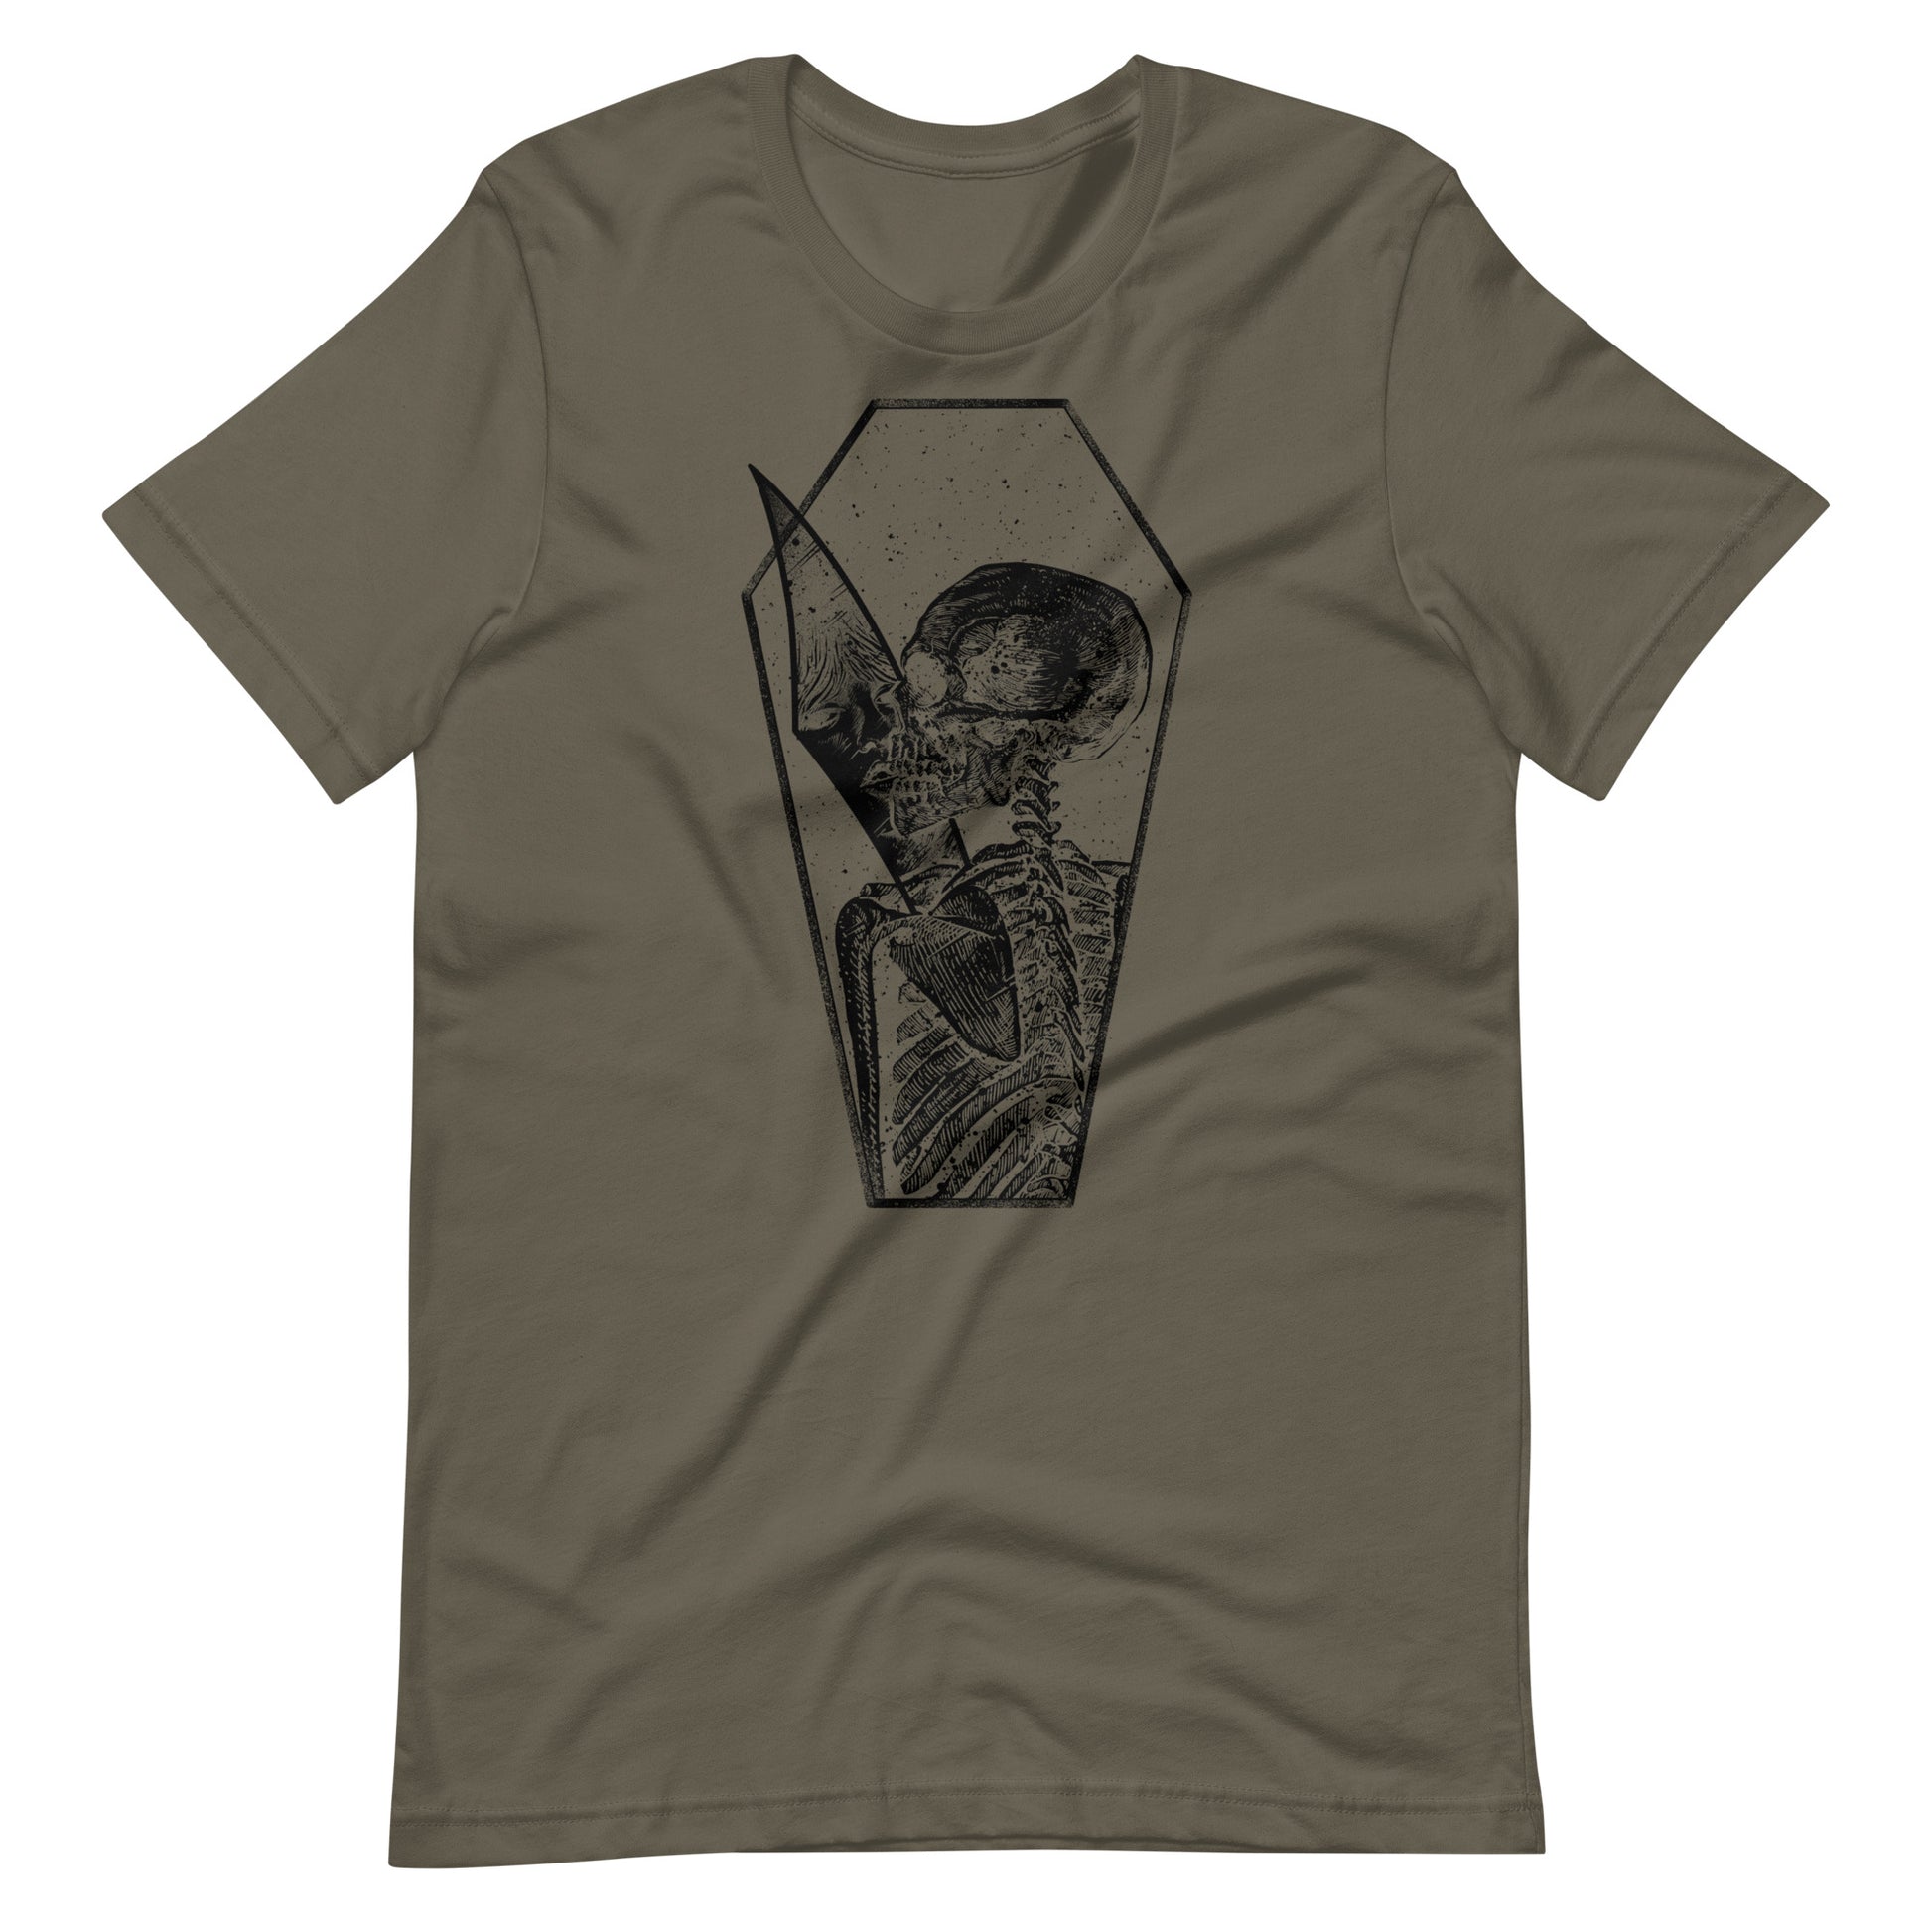 Shadow of Memories Black - Men's t-shirt - Army Front